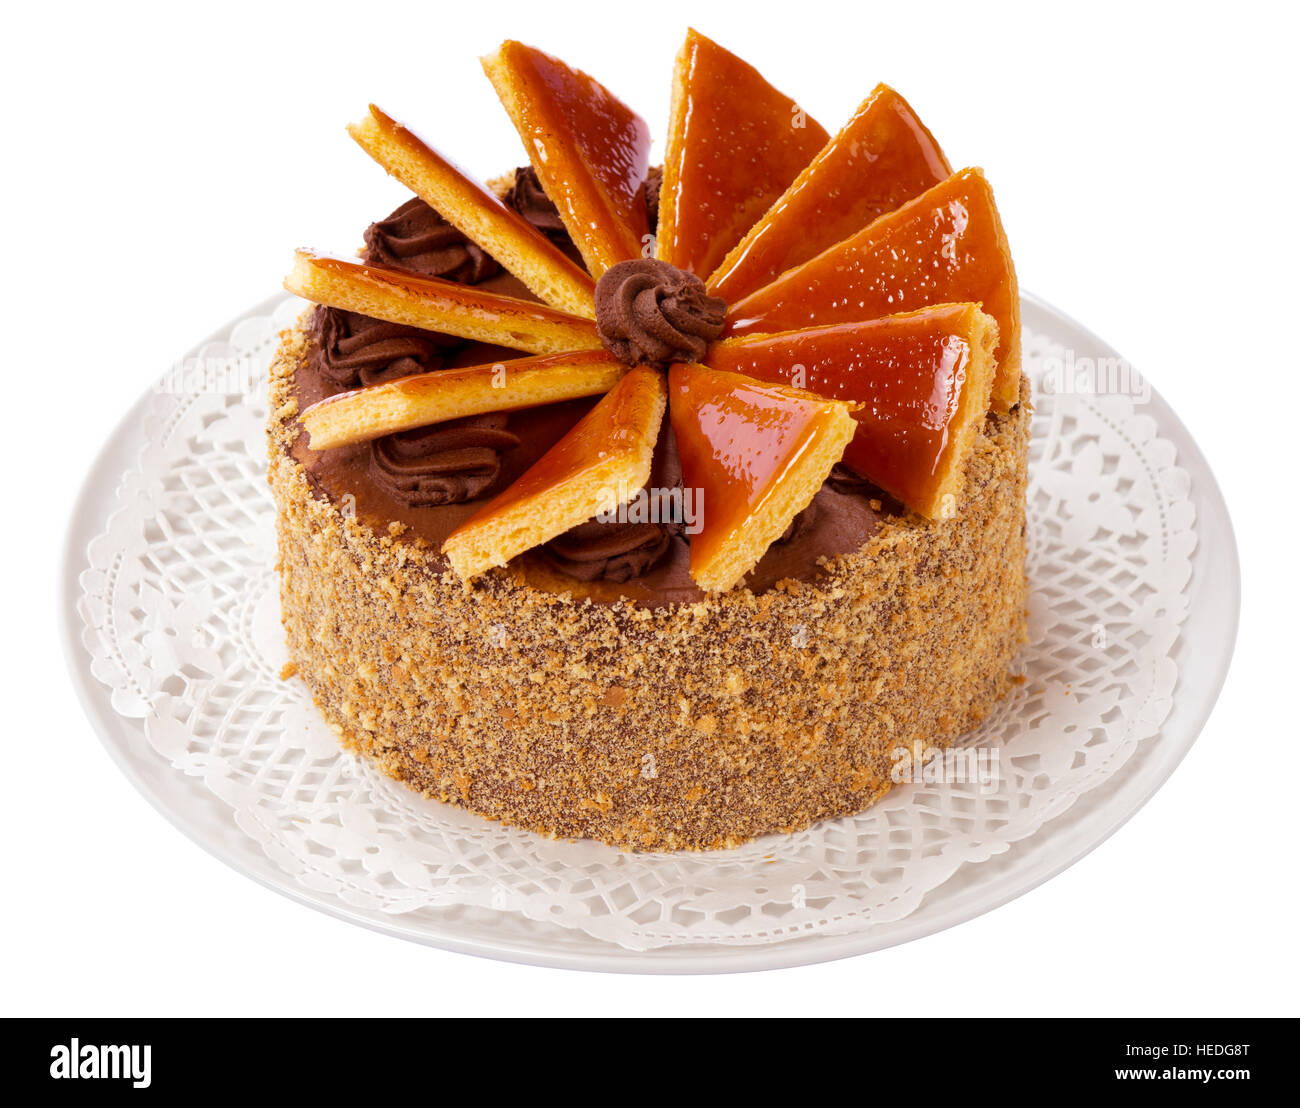 Famous Hungarian Dobos torte - cake with special frosting Stock Photo